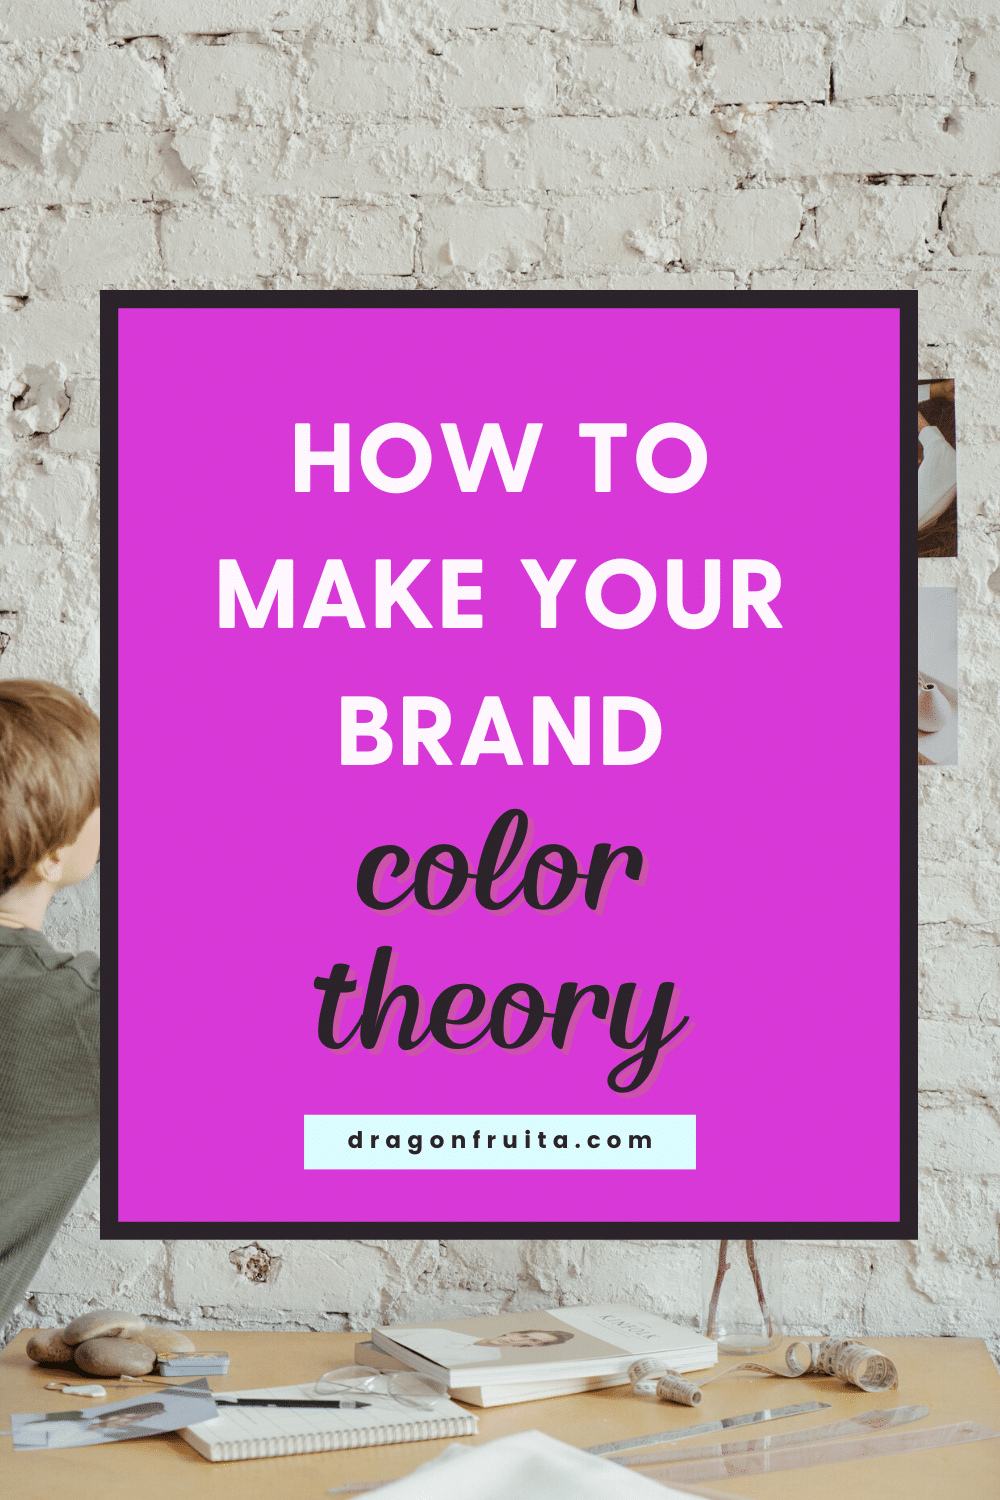 How to Make Your Brand: color theory